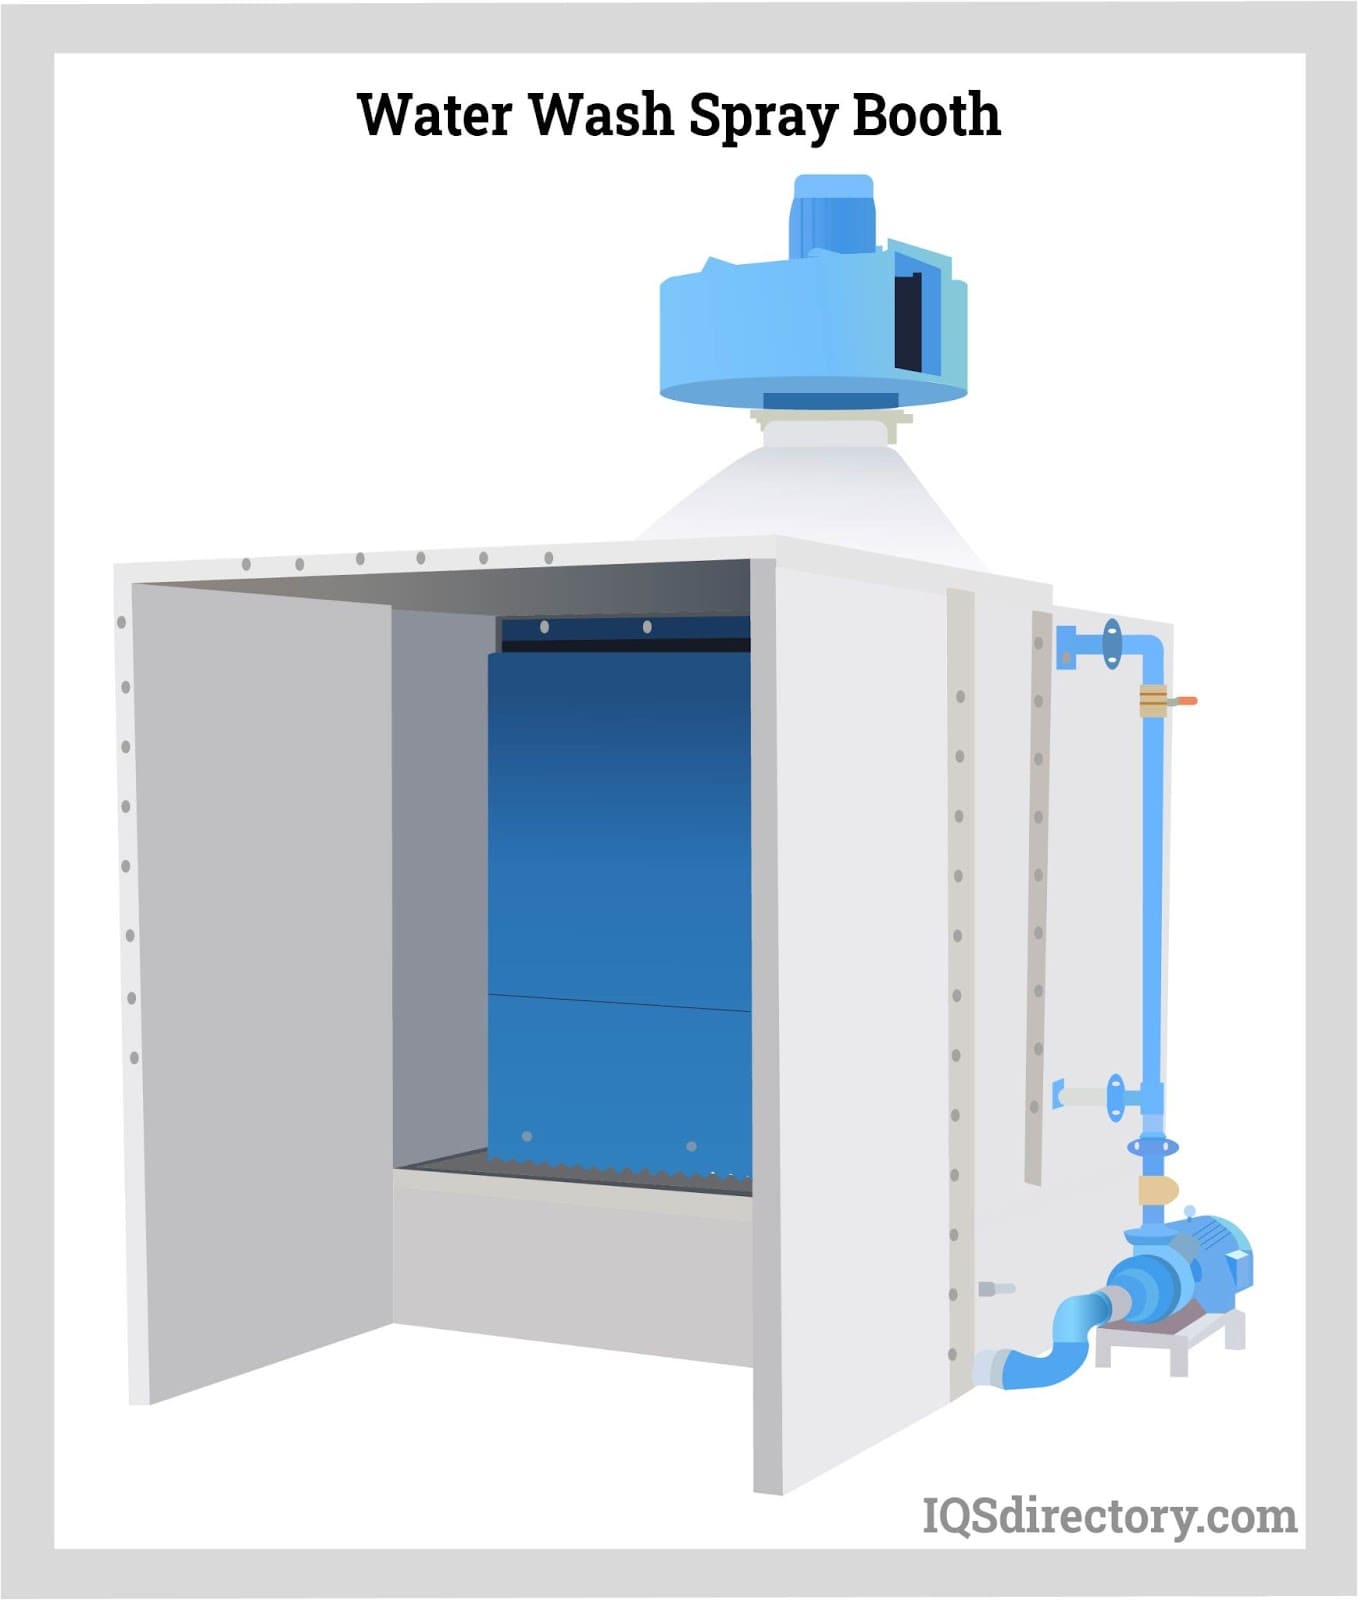 Water Wash Spray Booth